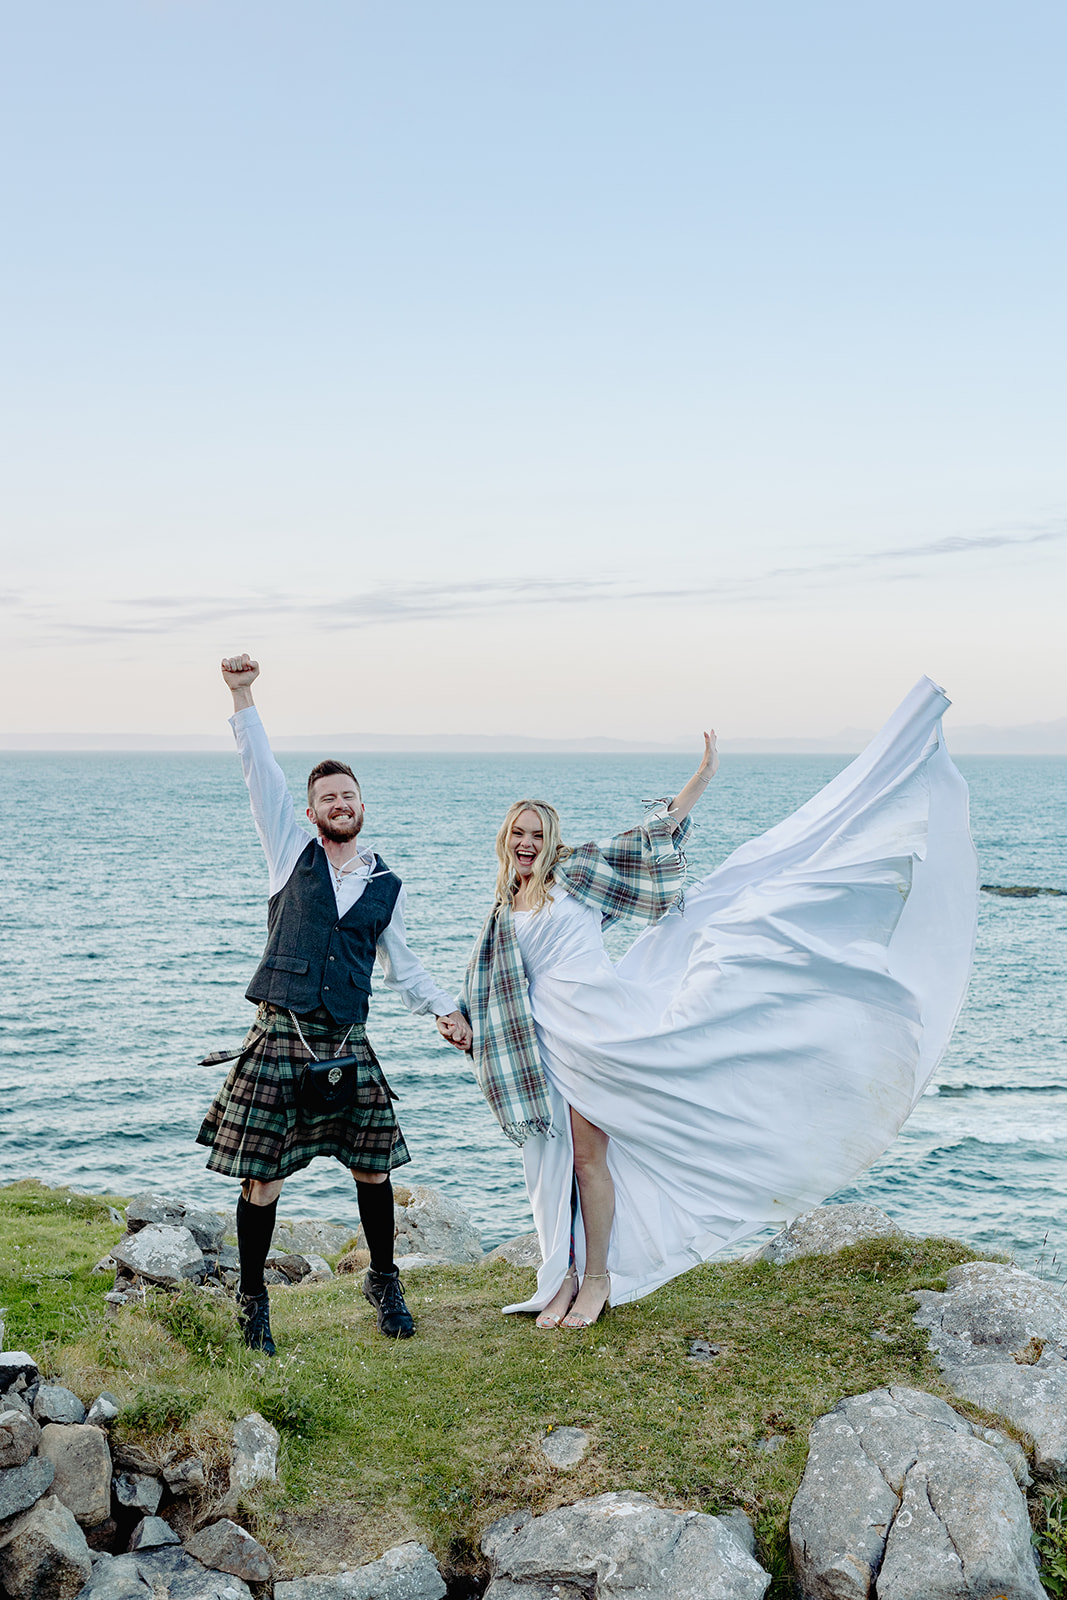 bride and groom with sea water behind them. They are wearing traditional Scottish attire and looking at the camera. The groom has his fist in the air and the bride is throwing her dress' train in the air.